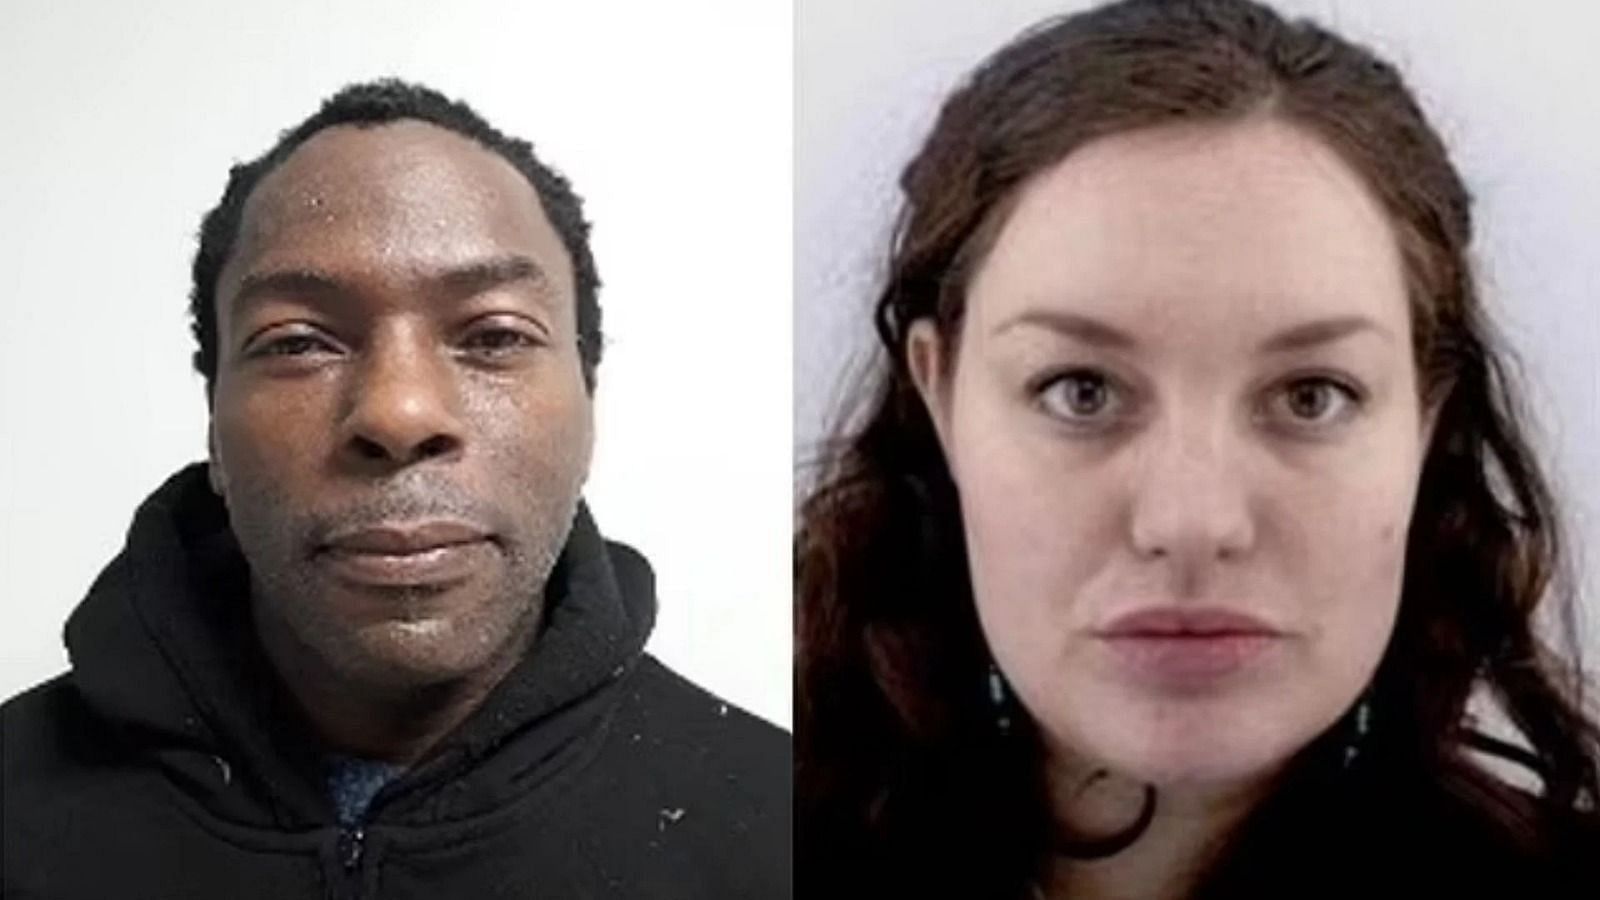 Constance Marten and her boyfriend carried baby in Lidl bag, bought petrol to cremate her after she died (Image via Met Police)